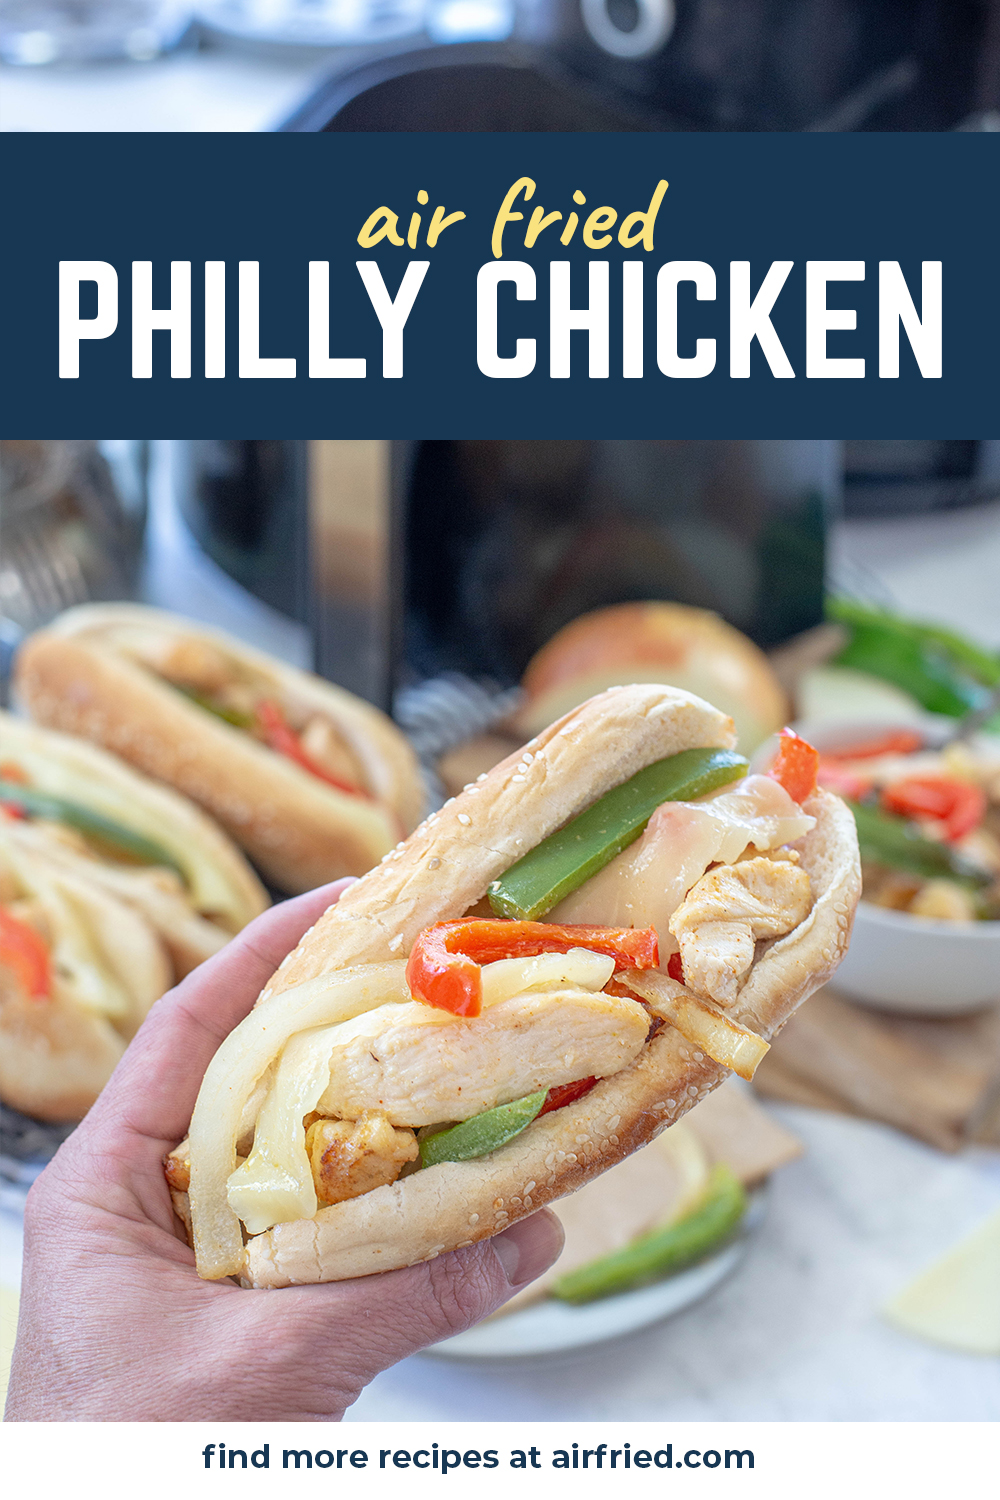 You will love the combination of flavors in this Philly chicken sandwich!